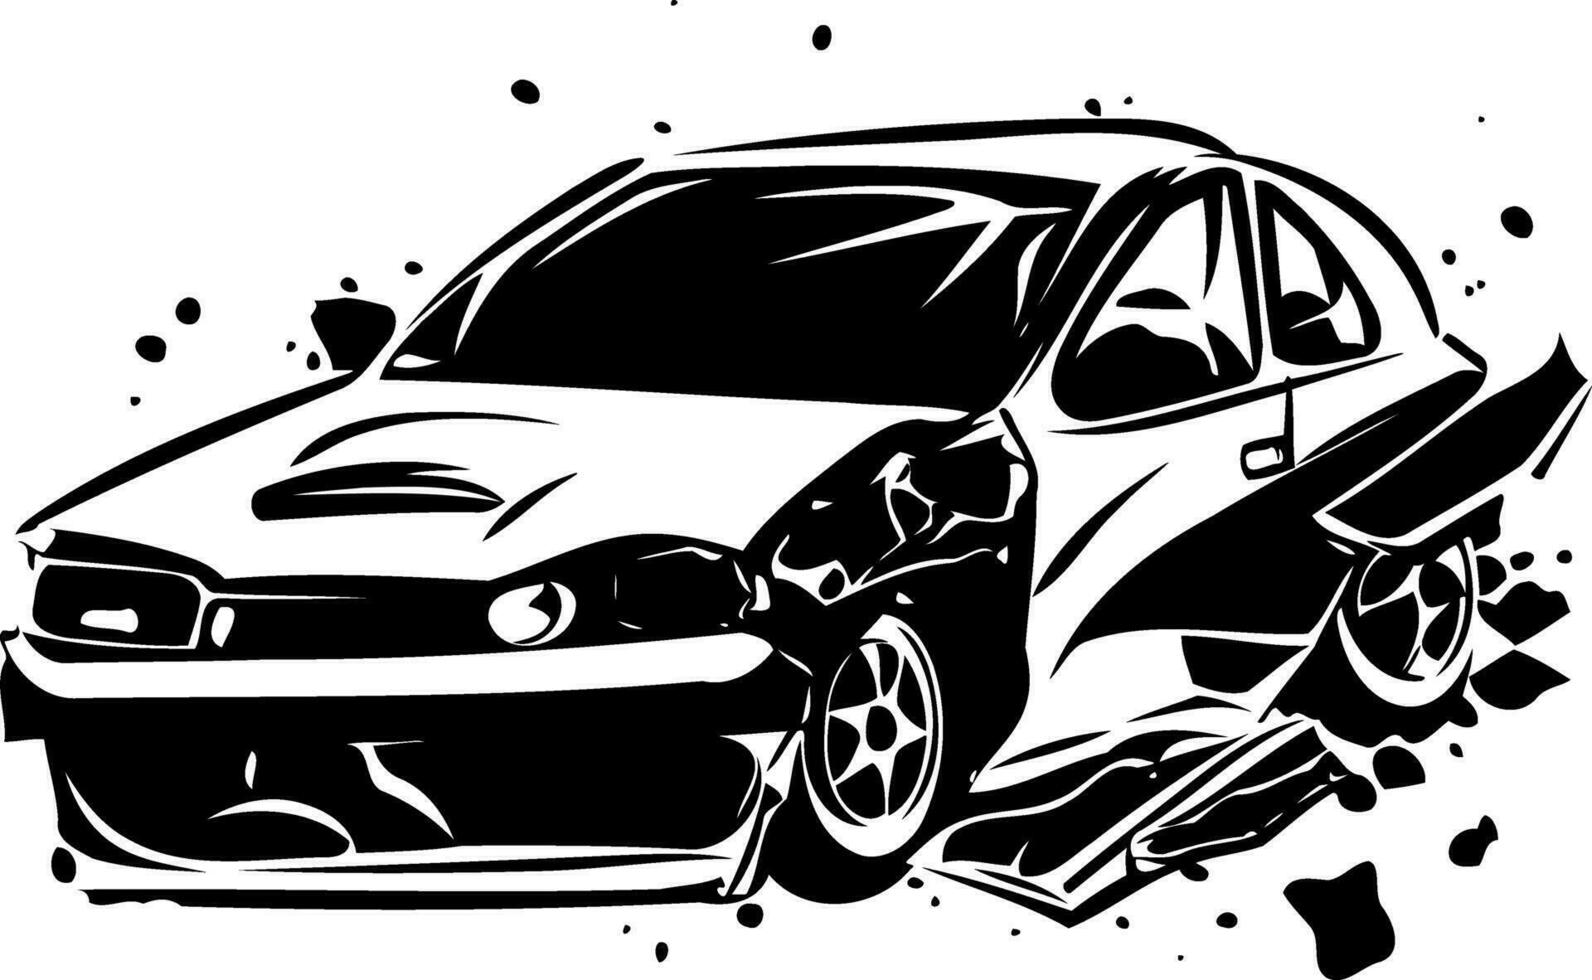 crashed car accident black and white vector